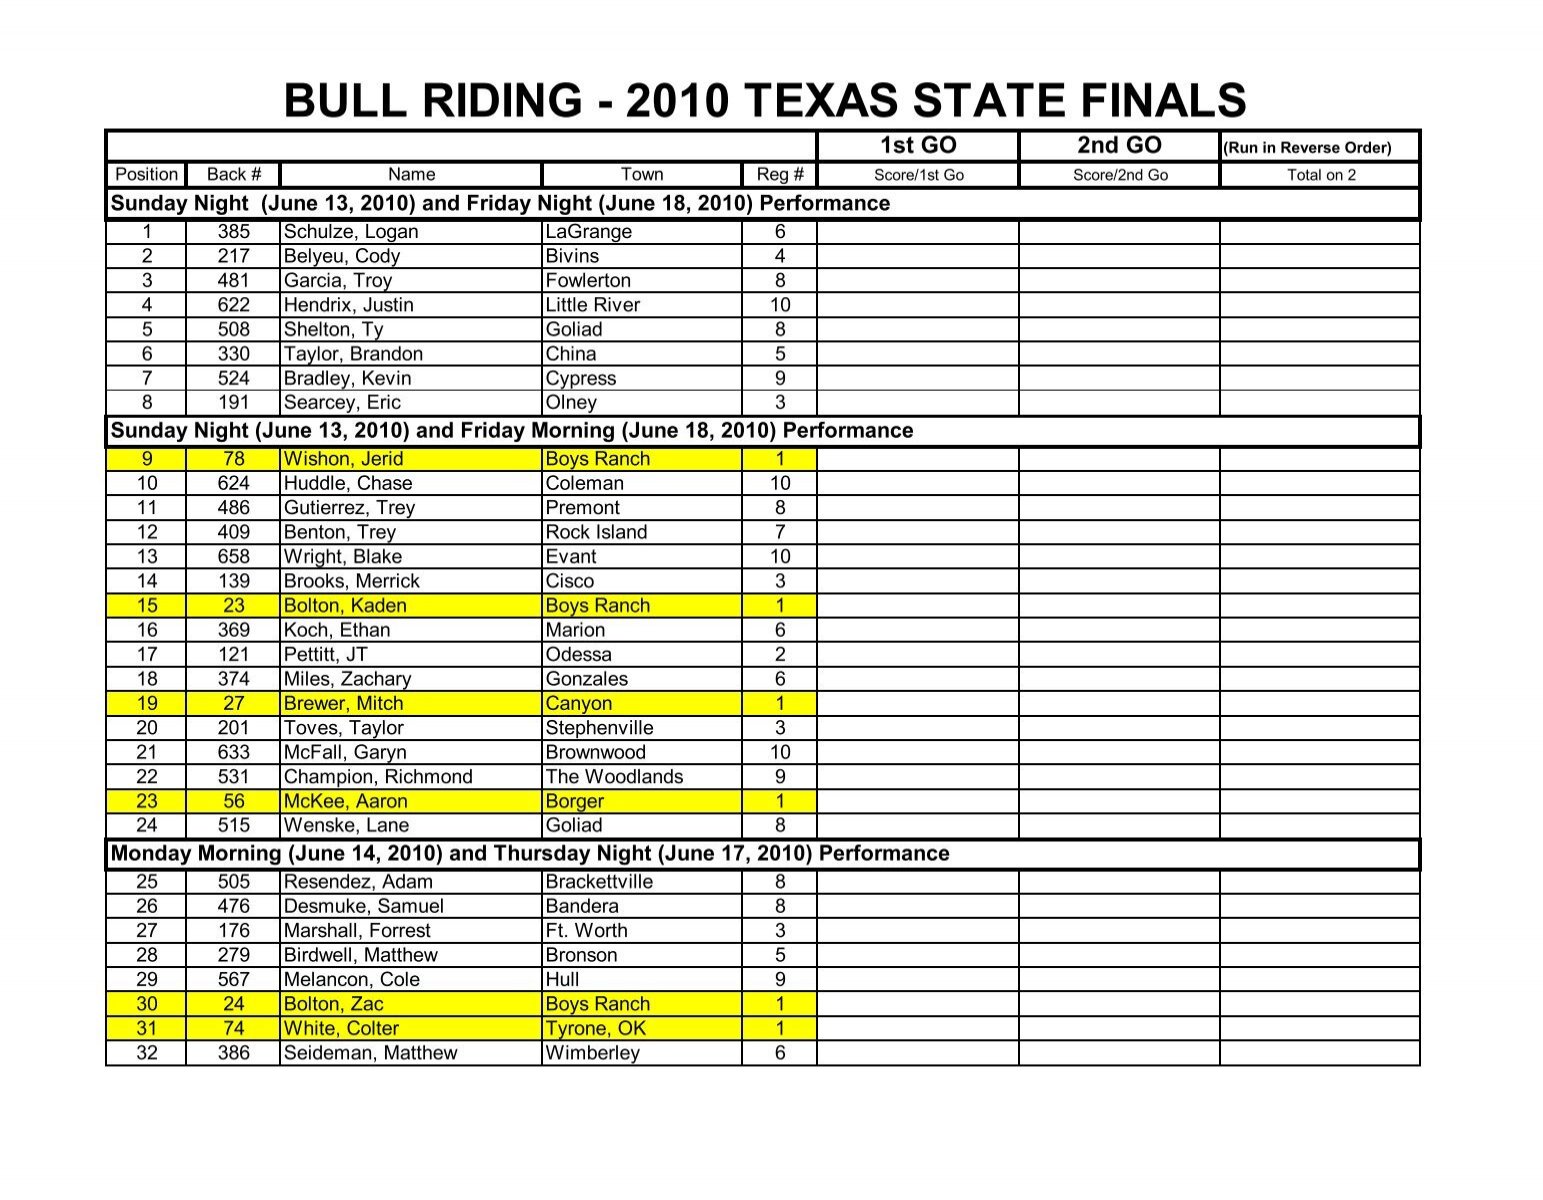 BULL RIDING - 2010 TEXAS STATE FINALS